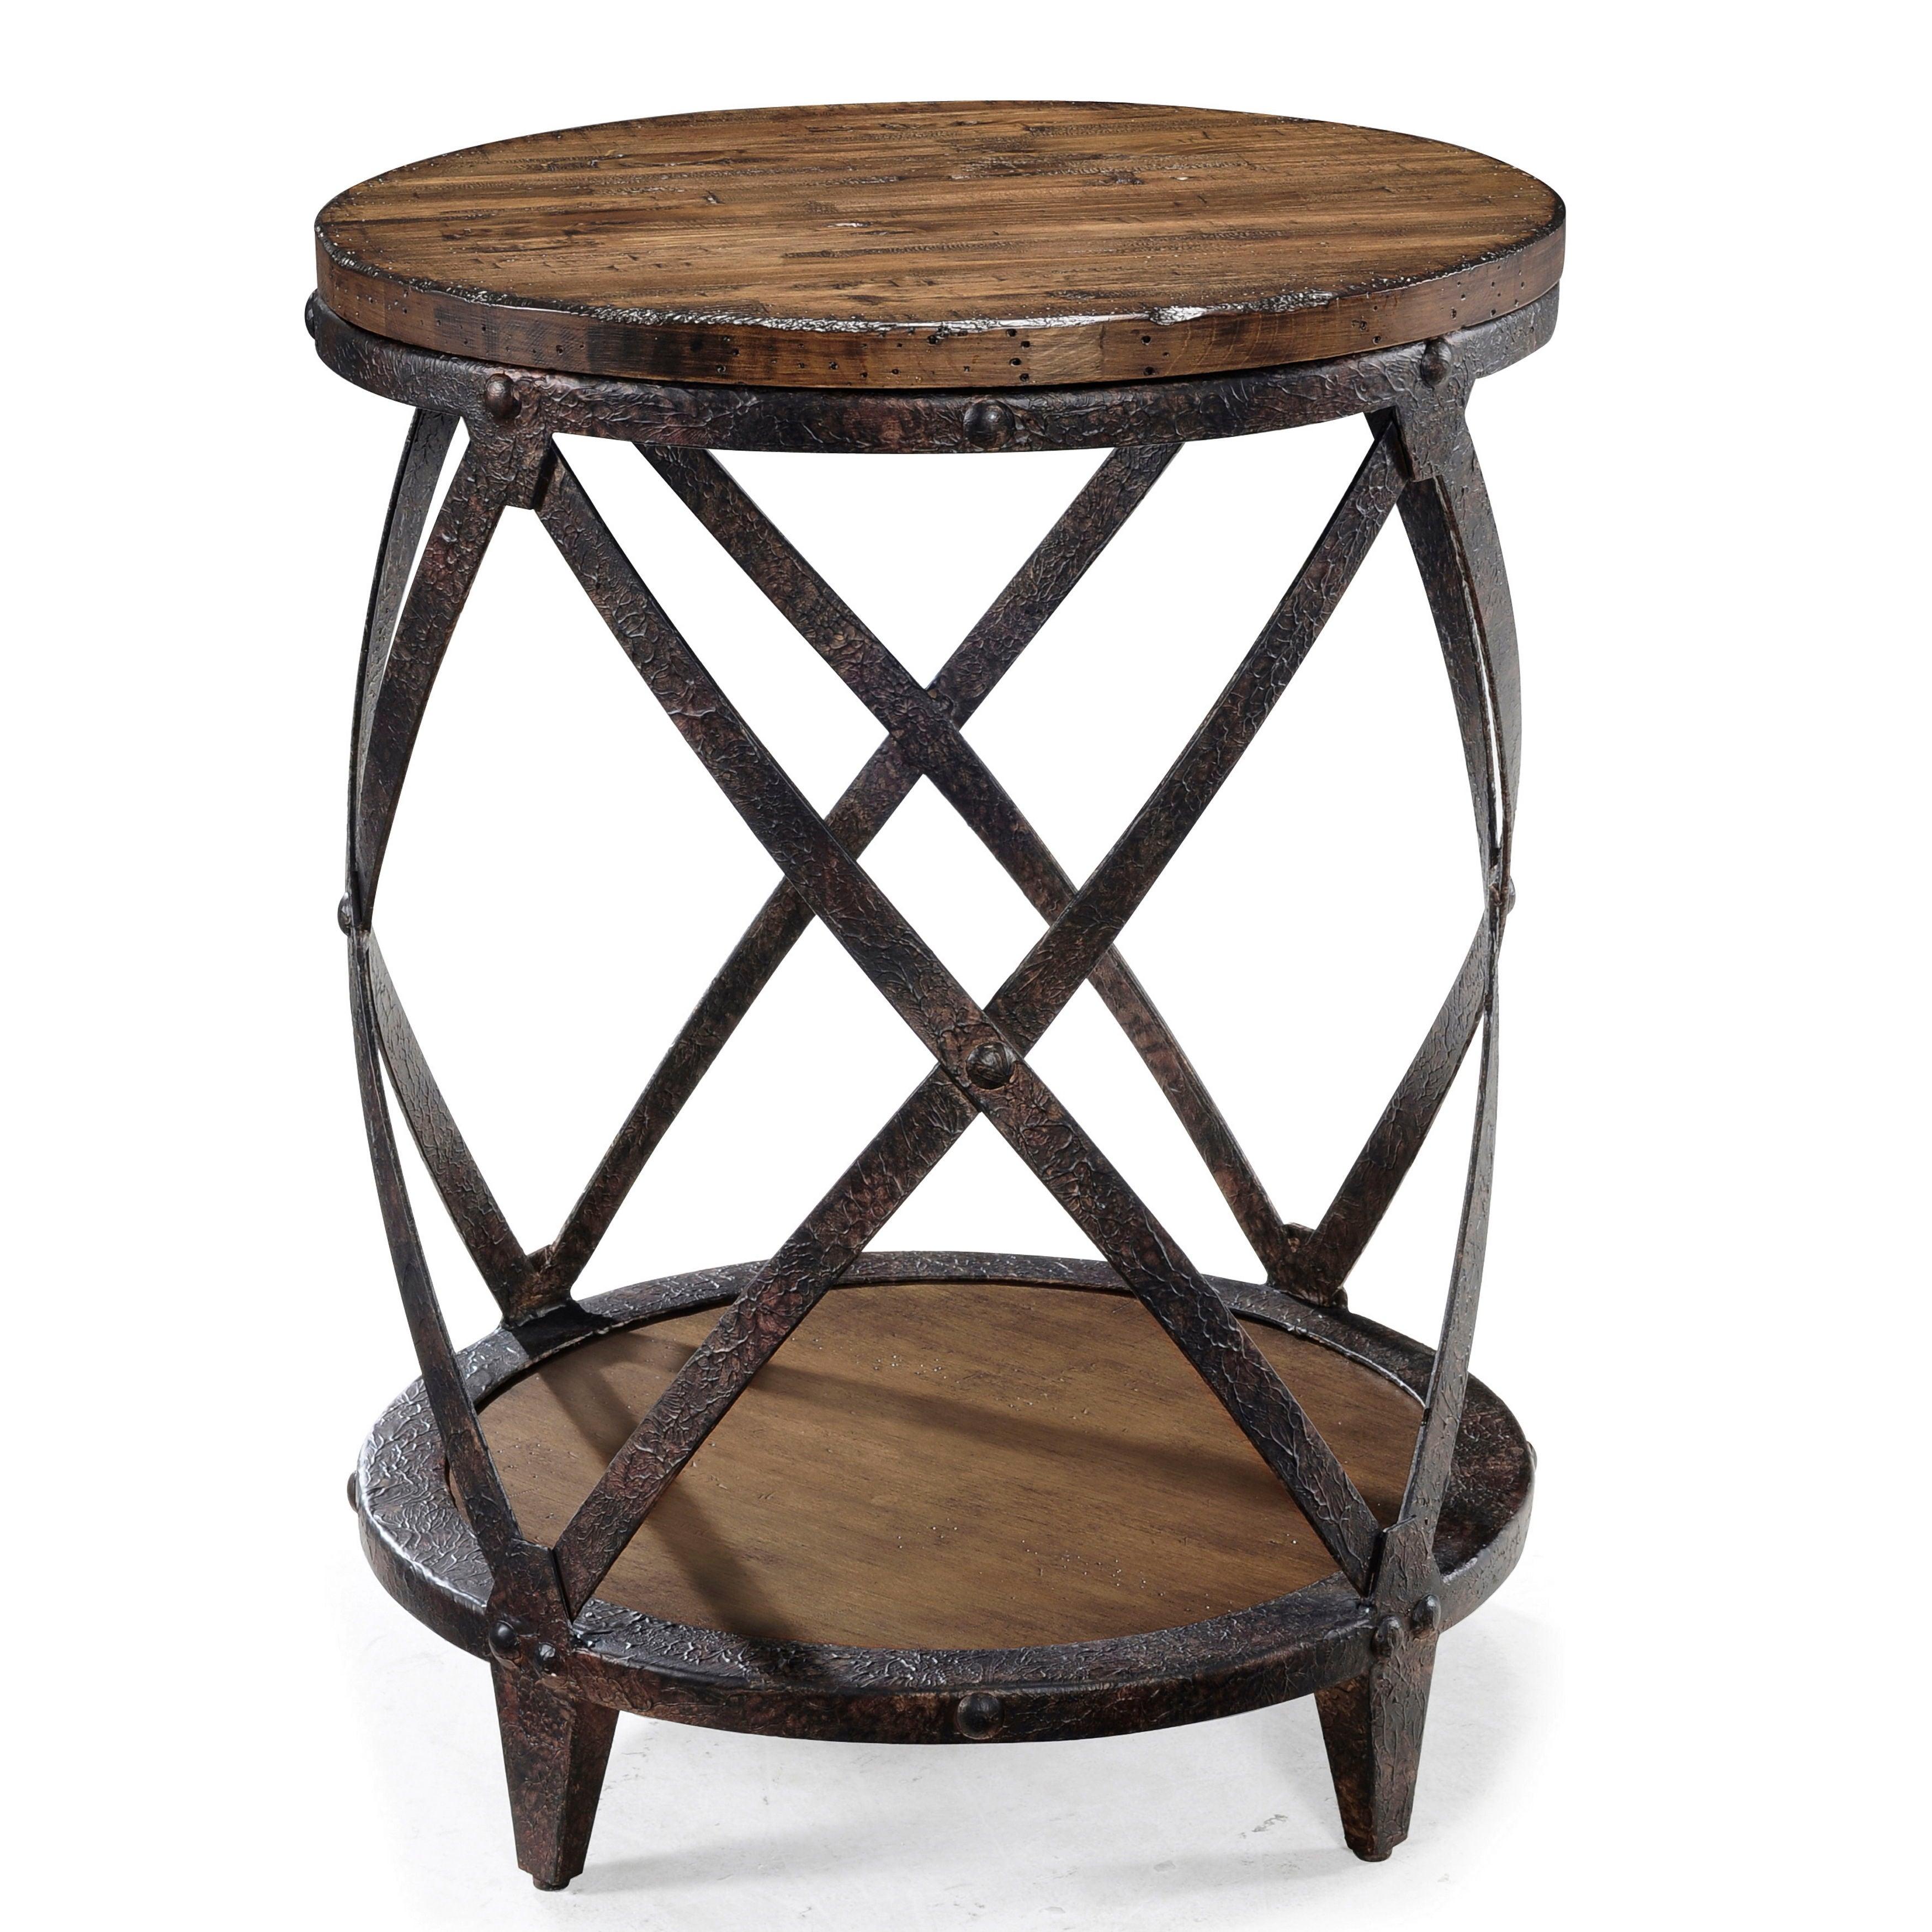 Magnussen Furniture - Pinebrook - Round Accent Table - Distressed Natural Pine - 5th Avenue Furniture